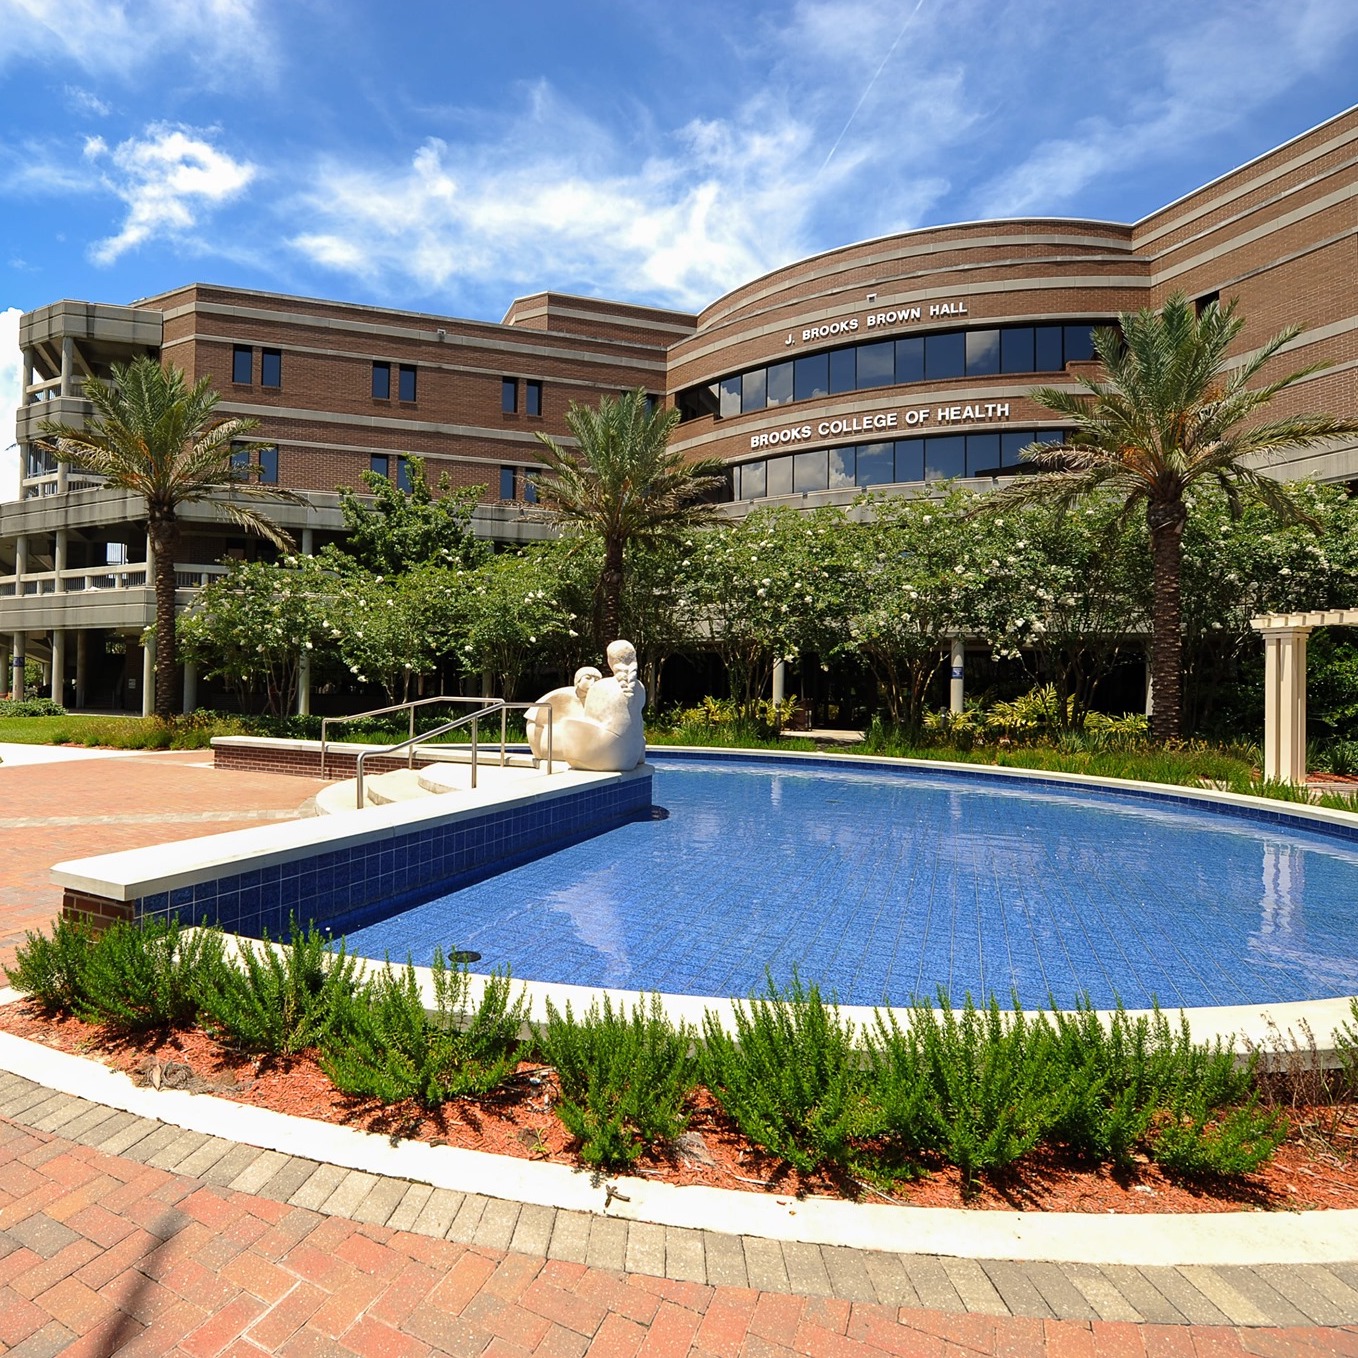 UNF brooks college of health building